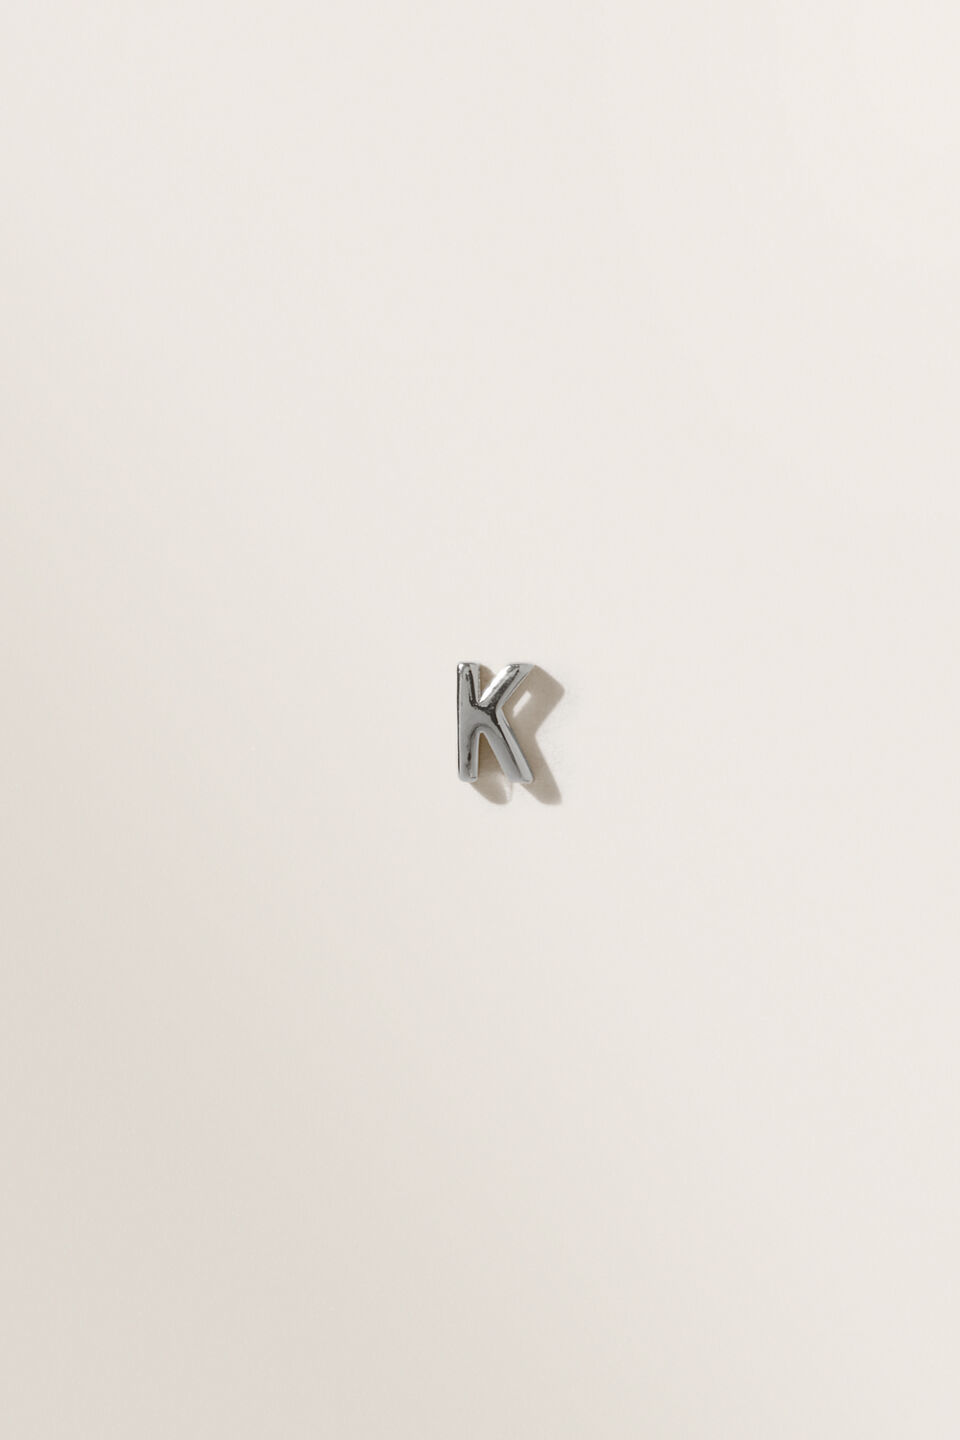 Silver Initial Charm  K